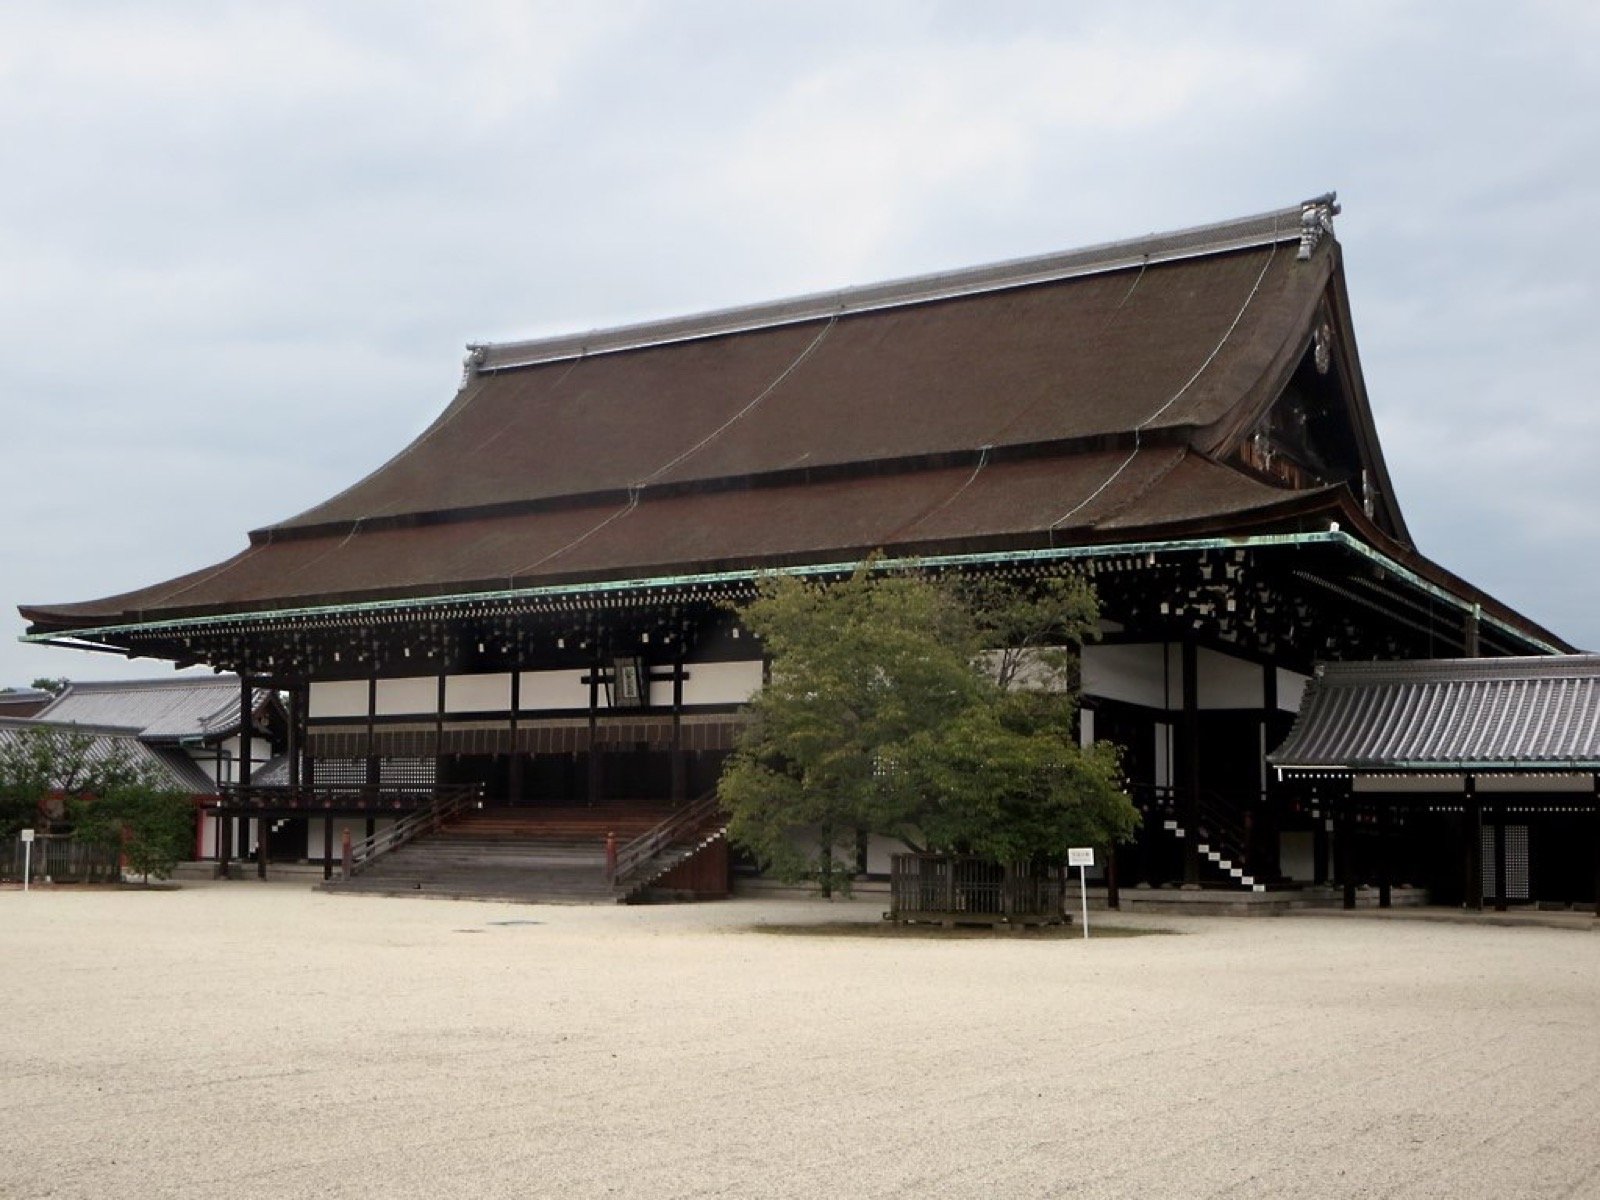 Photo of Kyoto Imperial Palace, Japan (Shishinden Hall by David Stanley)